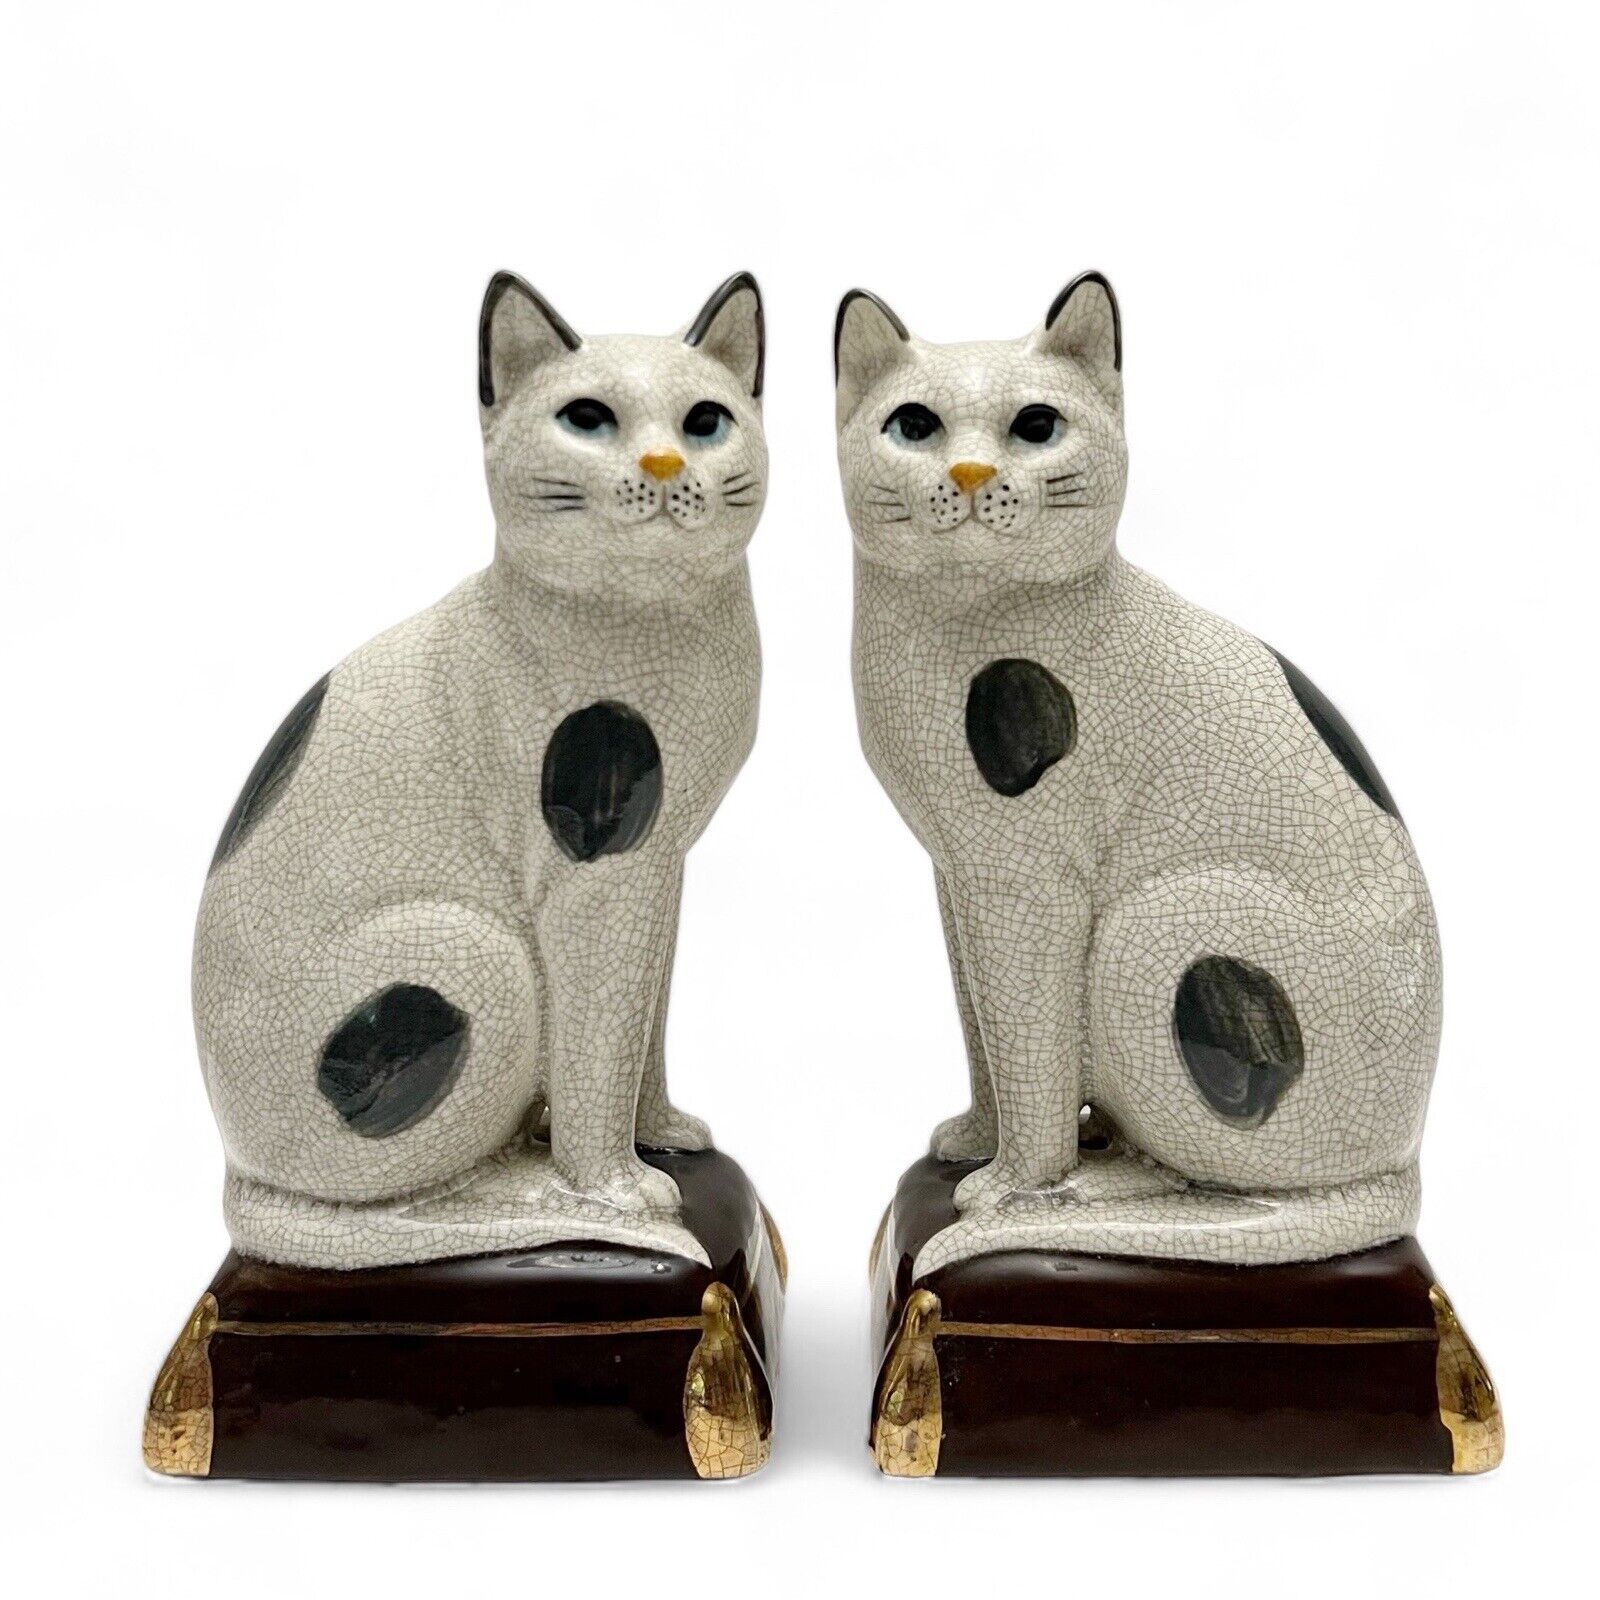 Vintage Pair of Takahashi Staffordshire Style Cats on Pillows Figurines Bookends